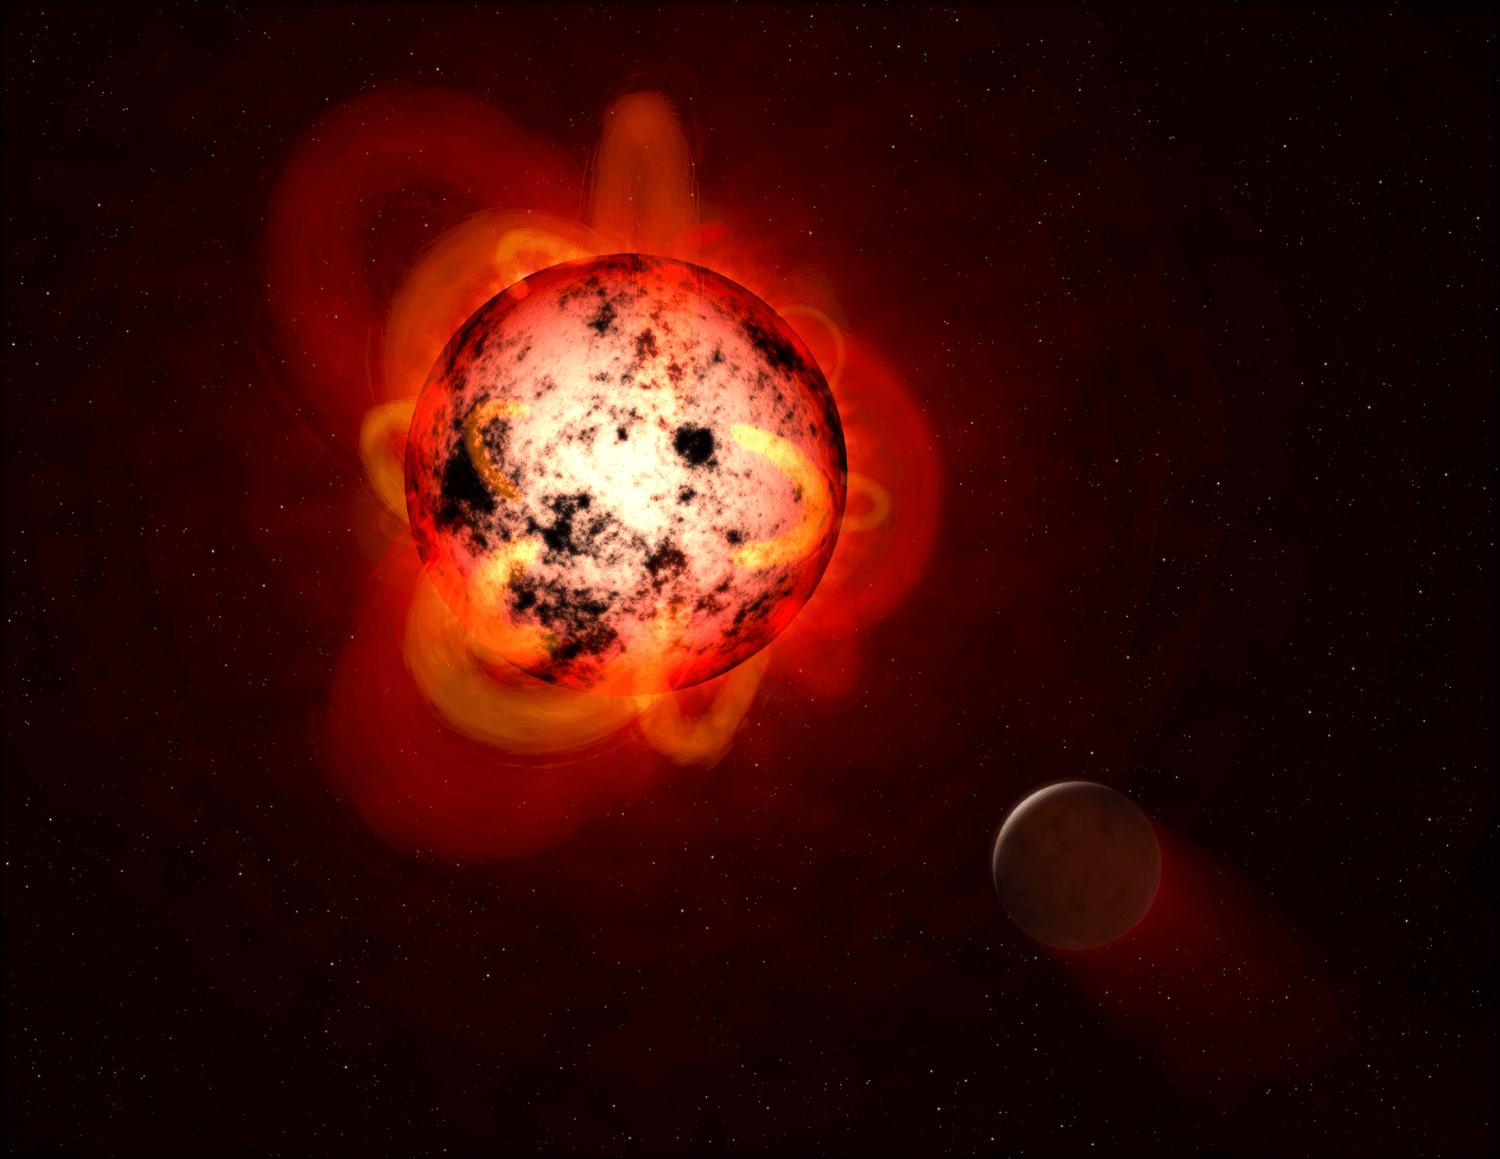 Art of a flaring red dwarf star, orbited by an exoplanet. (NASA/ESA/G. Bacon/STScI)